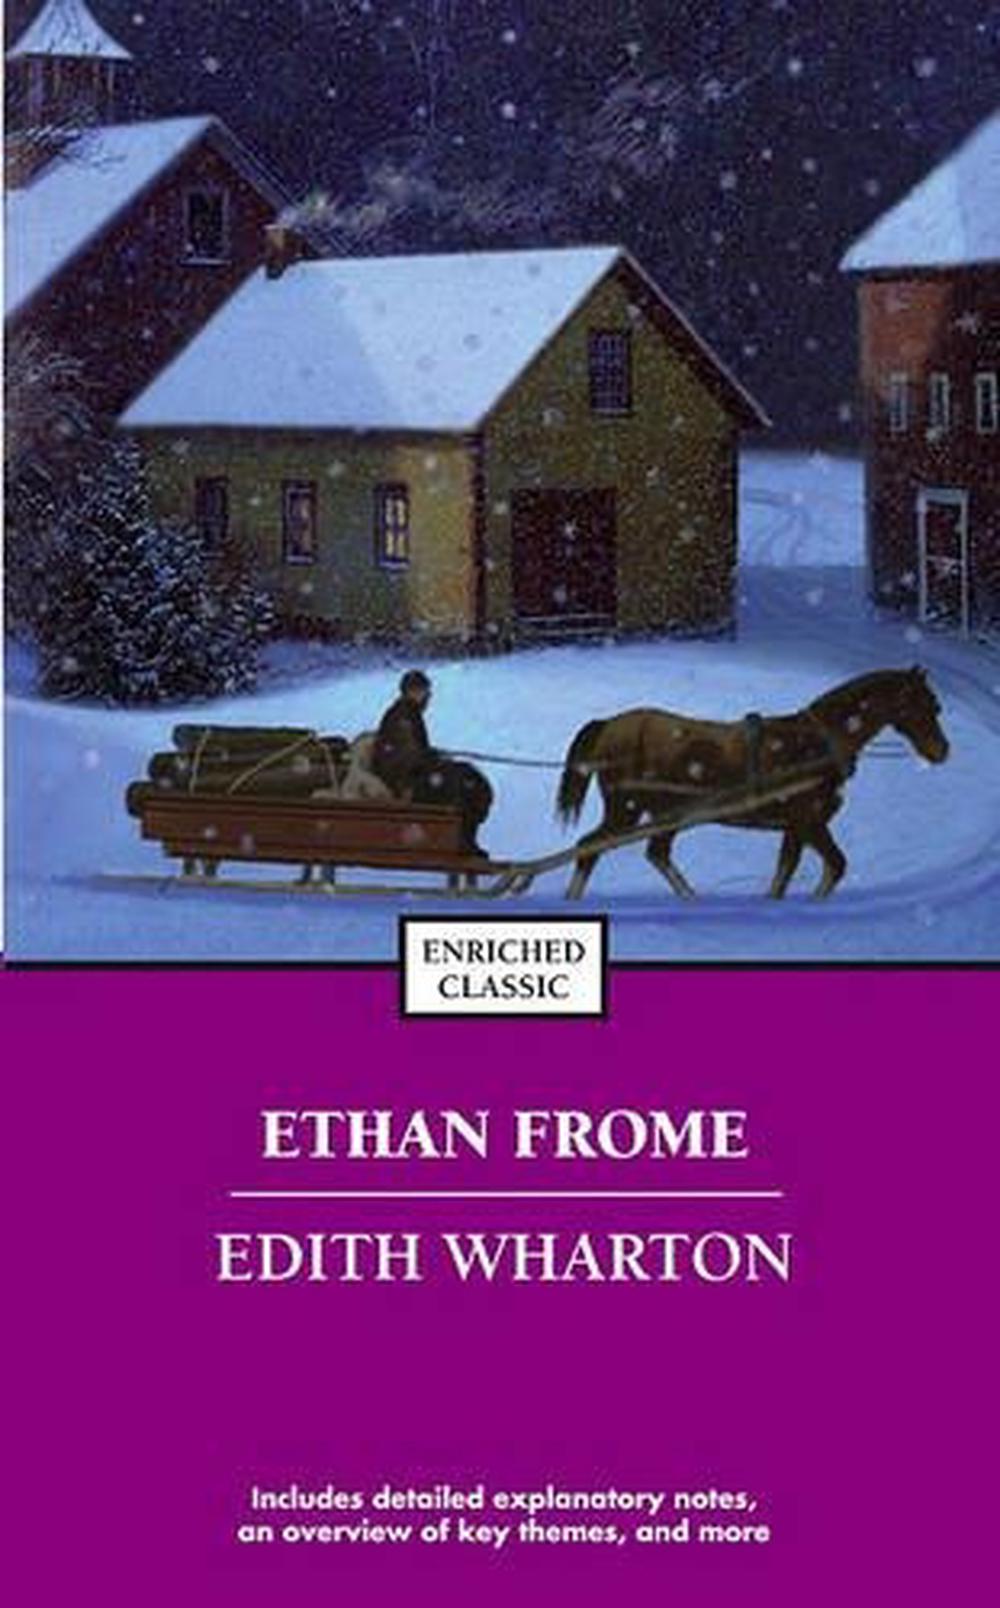 edith frome